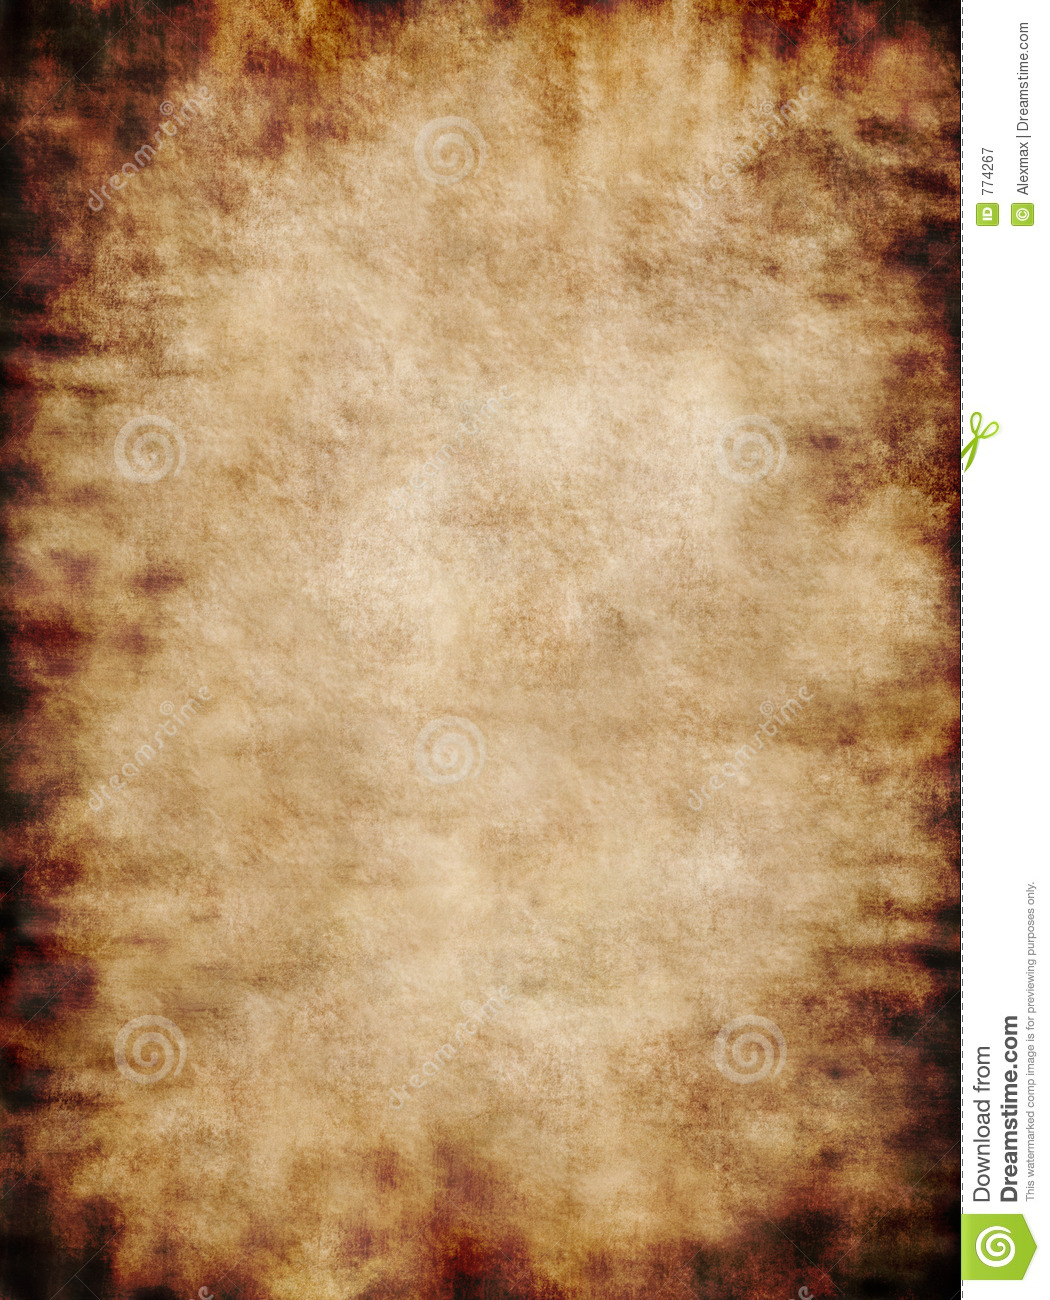 Ancient Rustic Grungy Parchment Paper Texture Background Royalty